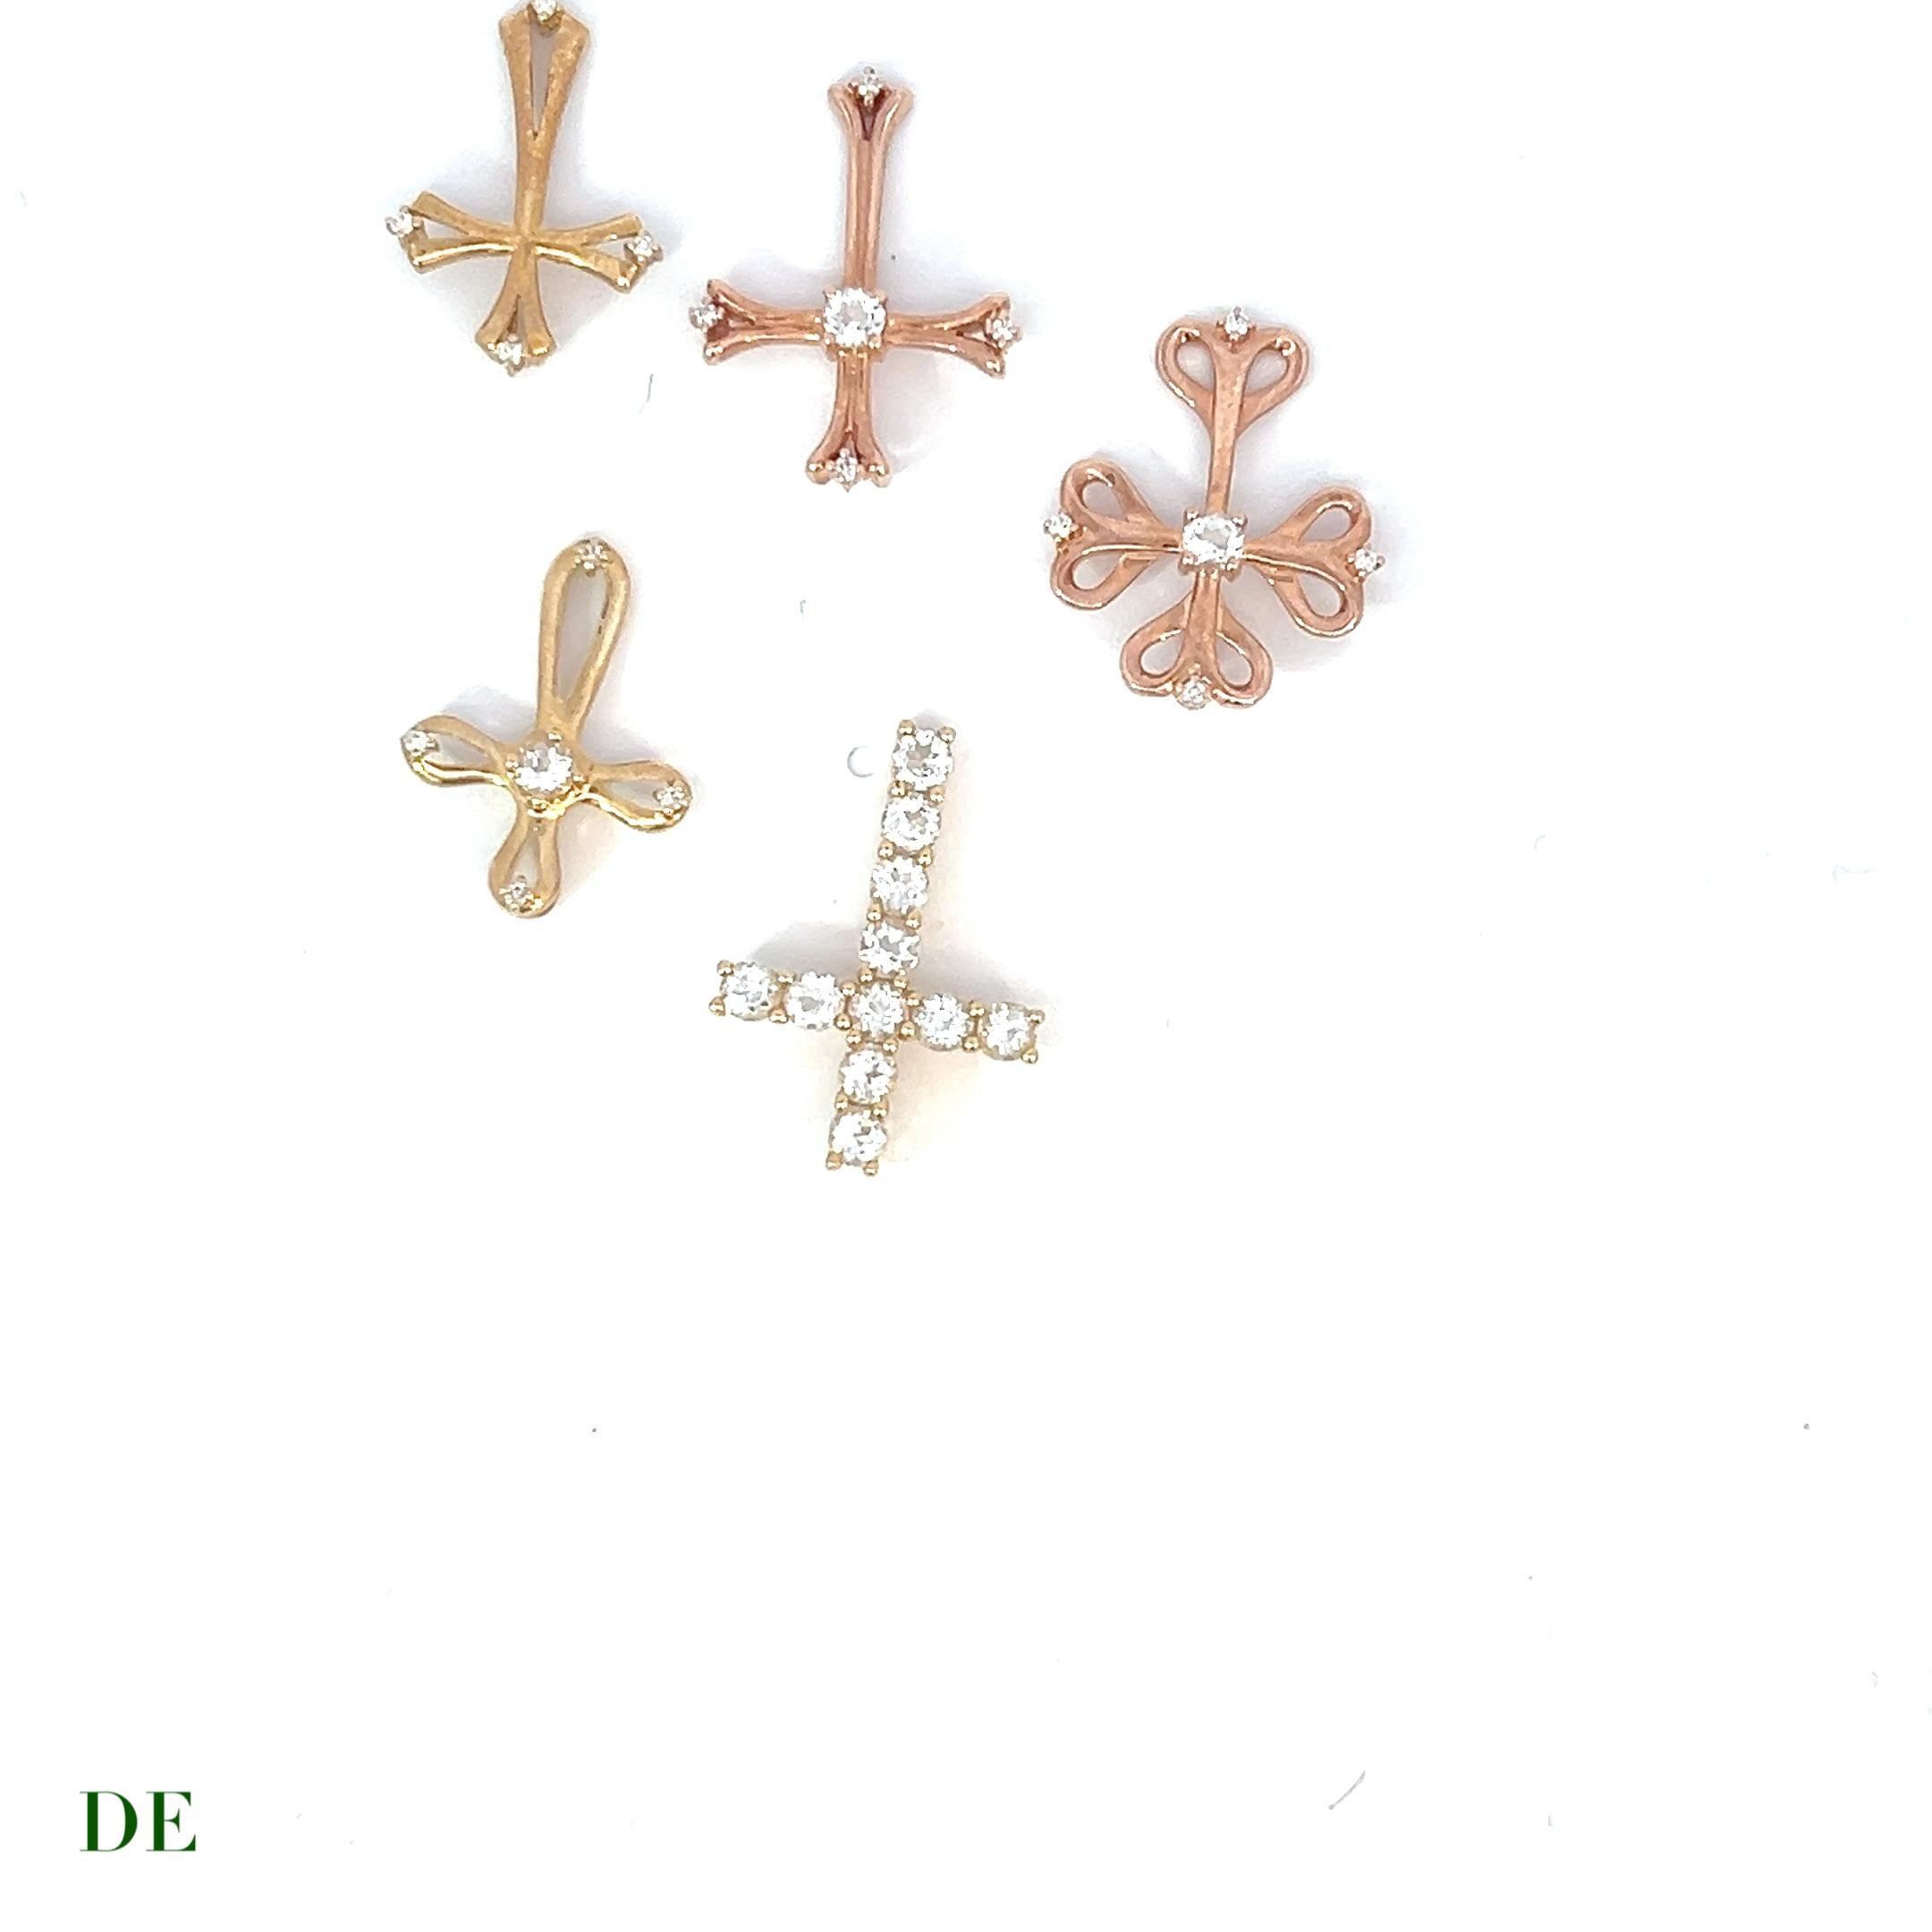 Brilliant Cut Family Cross Collection - 5 pcs of 14k Gold Cross with Diamonds and White Topaz